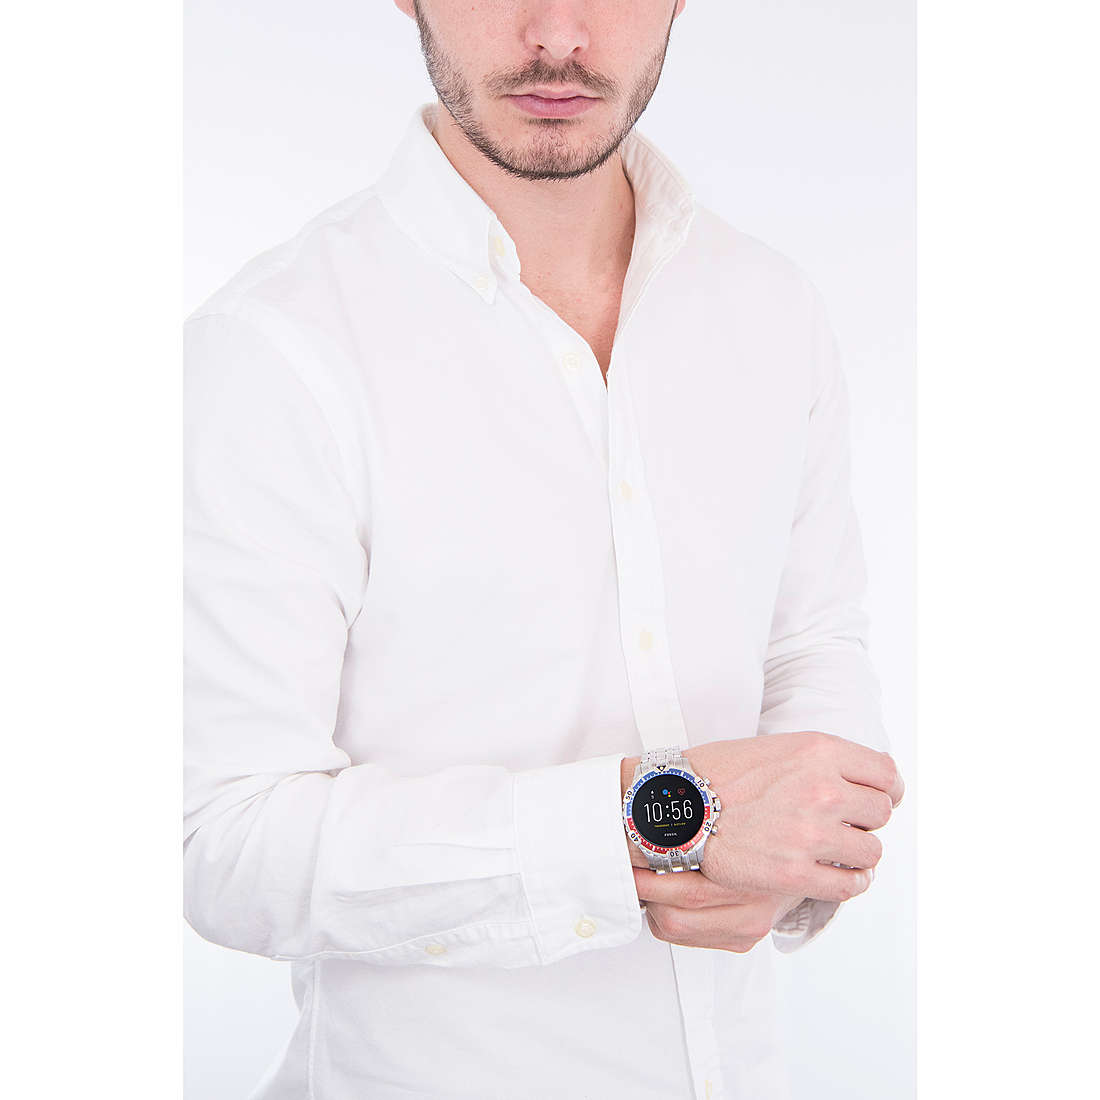 Fossil Smartwatches Spring 2020 homme FTW4040 Je porte